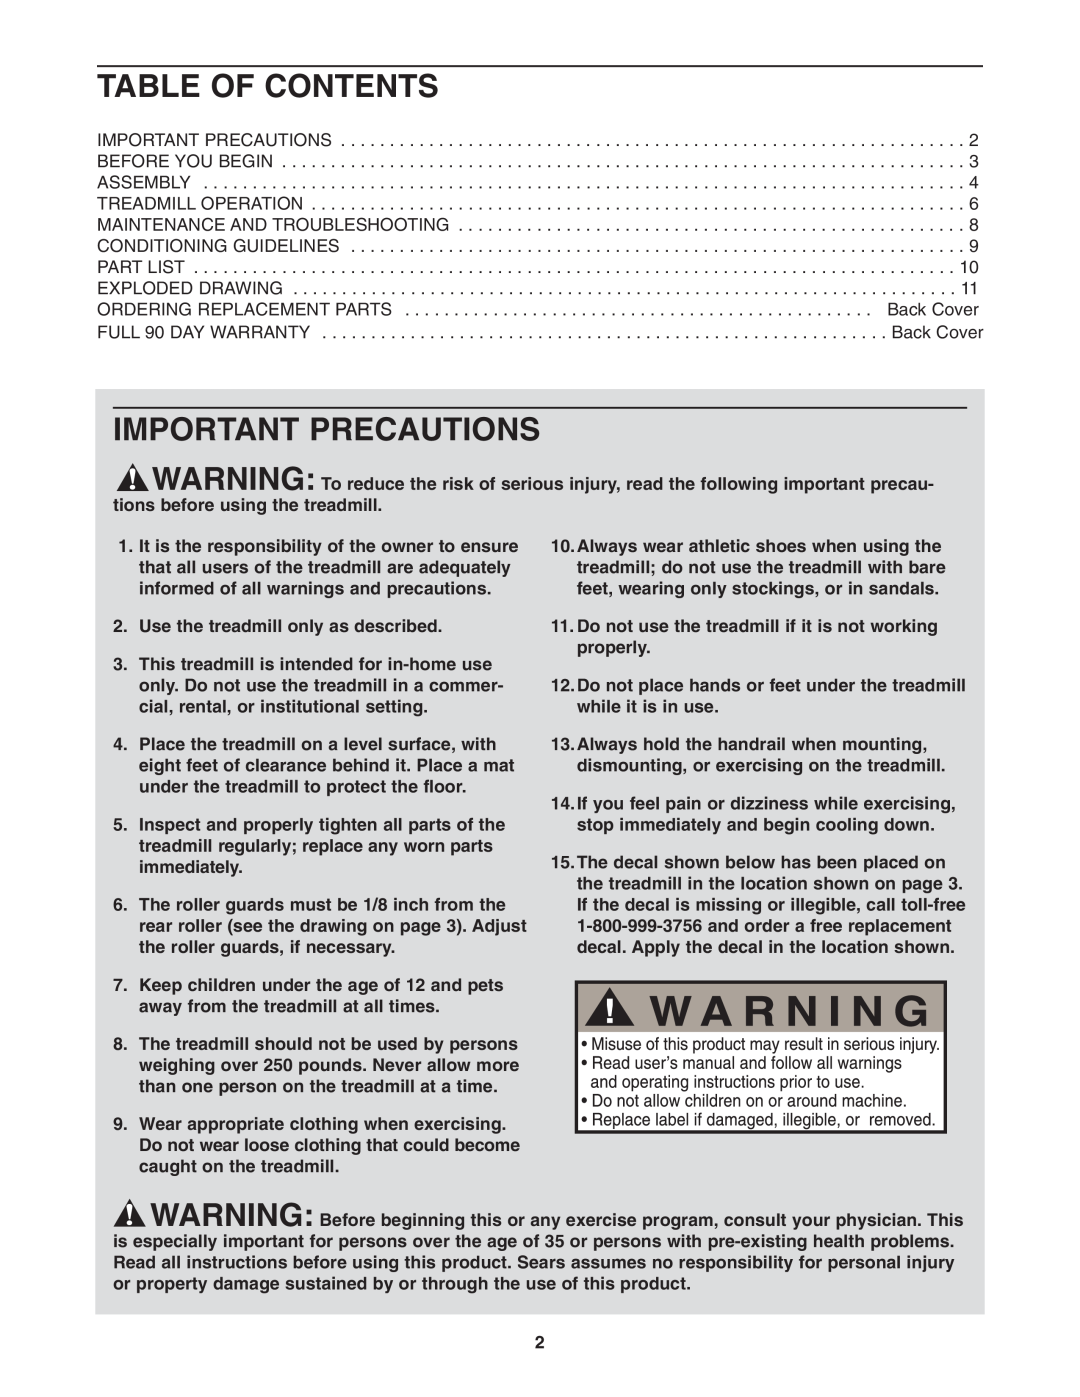 Weslo 831.291030 user manual Table Of Contents, Important Precautions, Use the treadmill only as described 